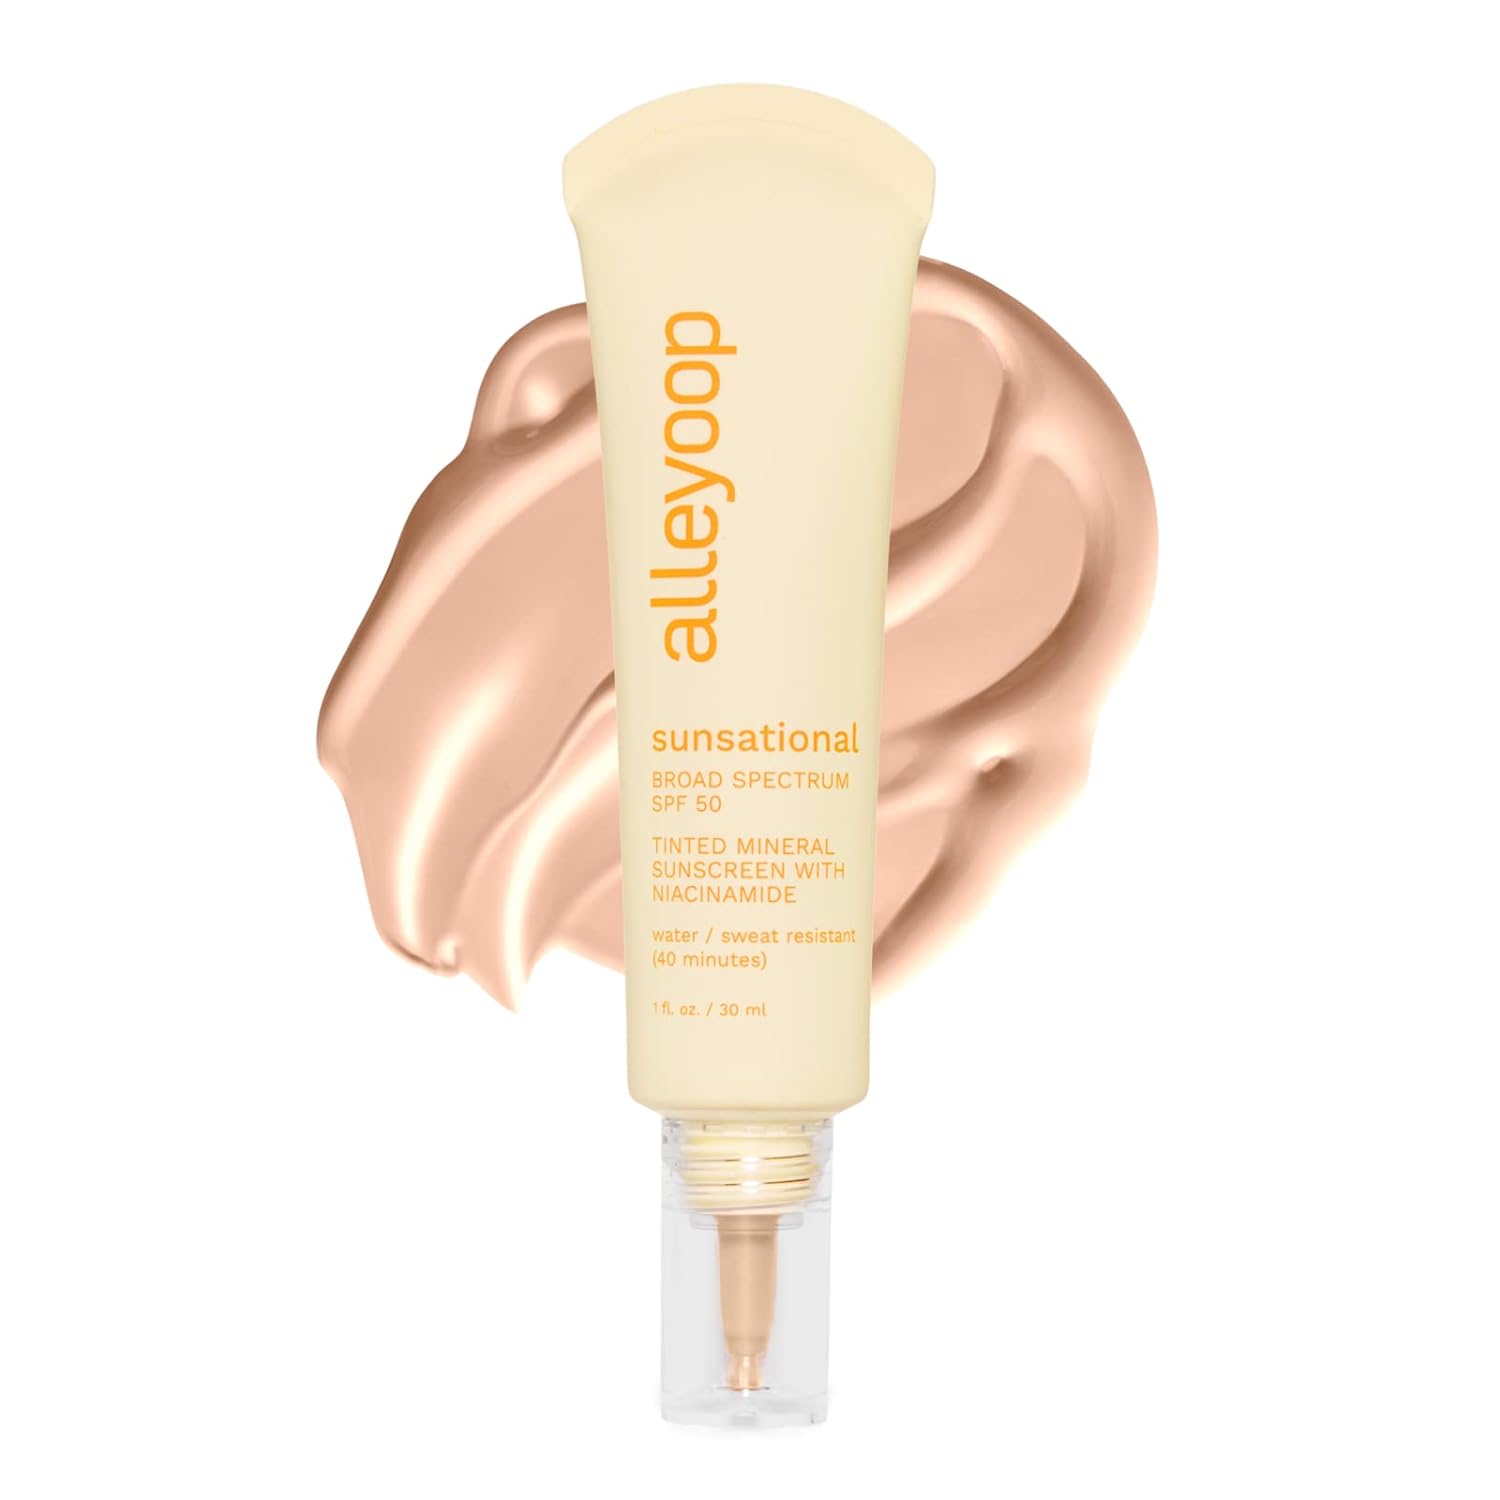 Alleyoop Sunsational Skin Tint Sunscreen for Face Broad Spectrum SPF 50, Tinted 100% Mineral Sunscreen with Niacinamide & Jojoba, Protects Hydrates and Soothes Skin, Vegan, Cruelty-Free - Glisten